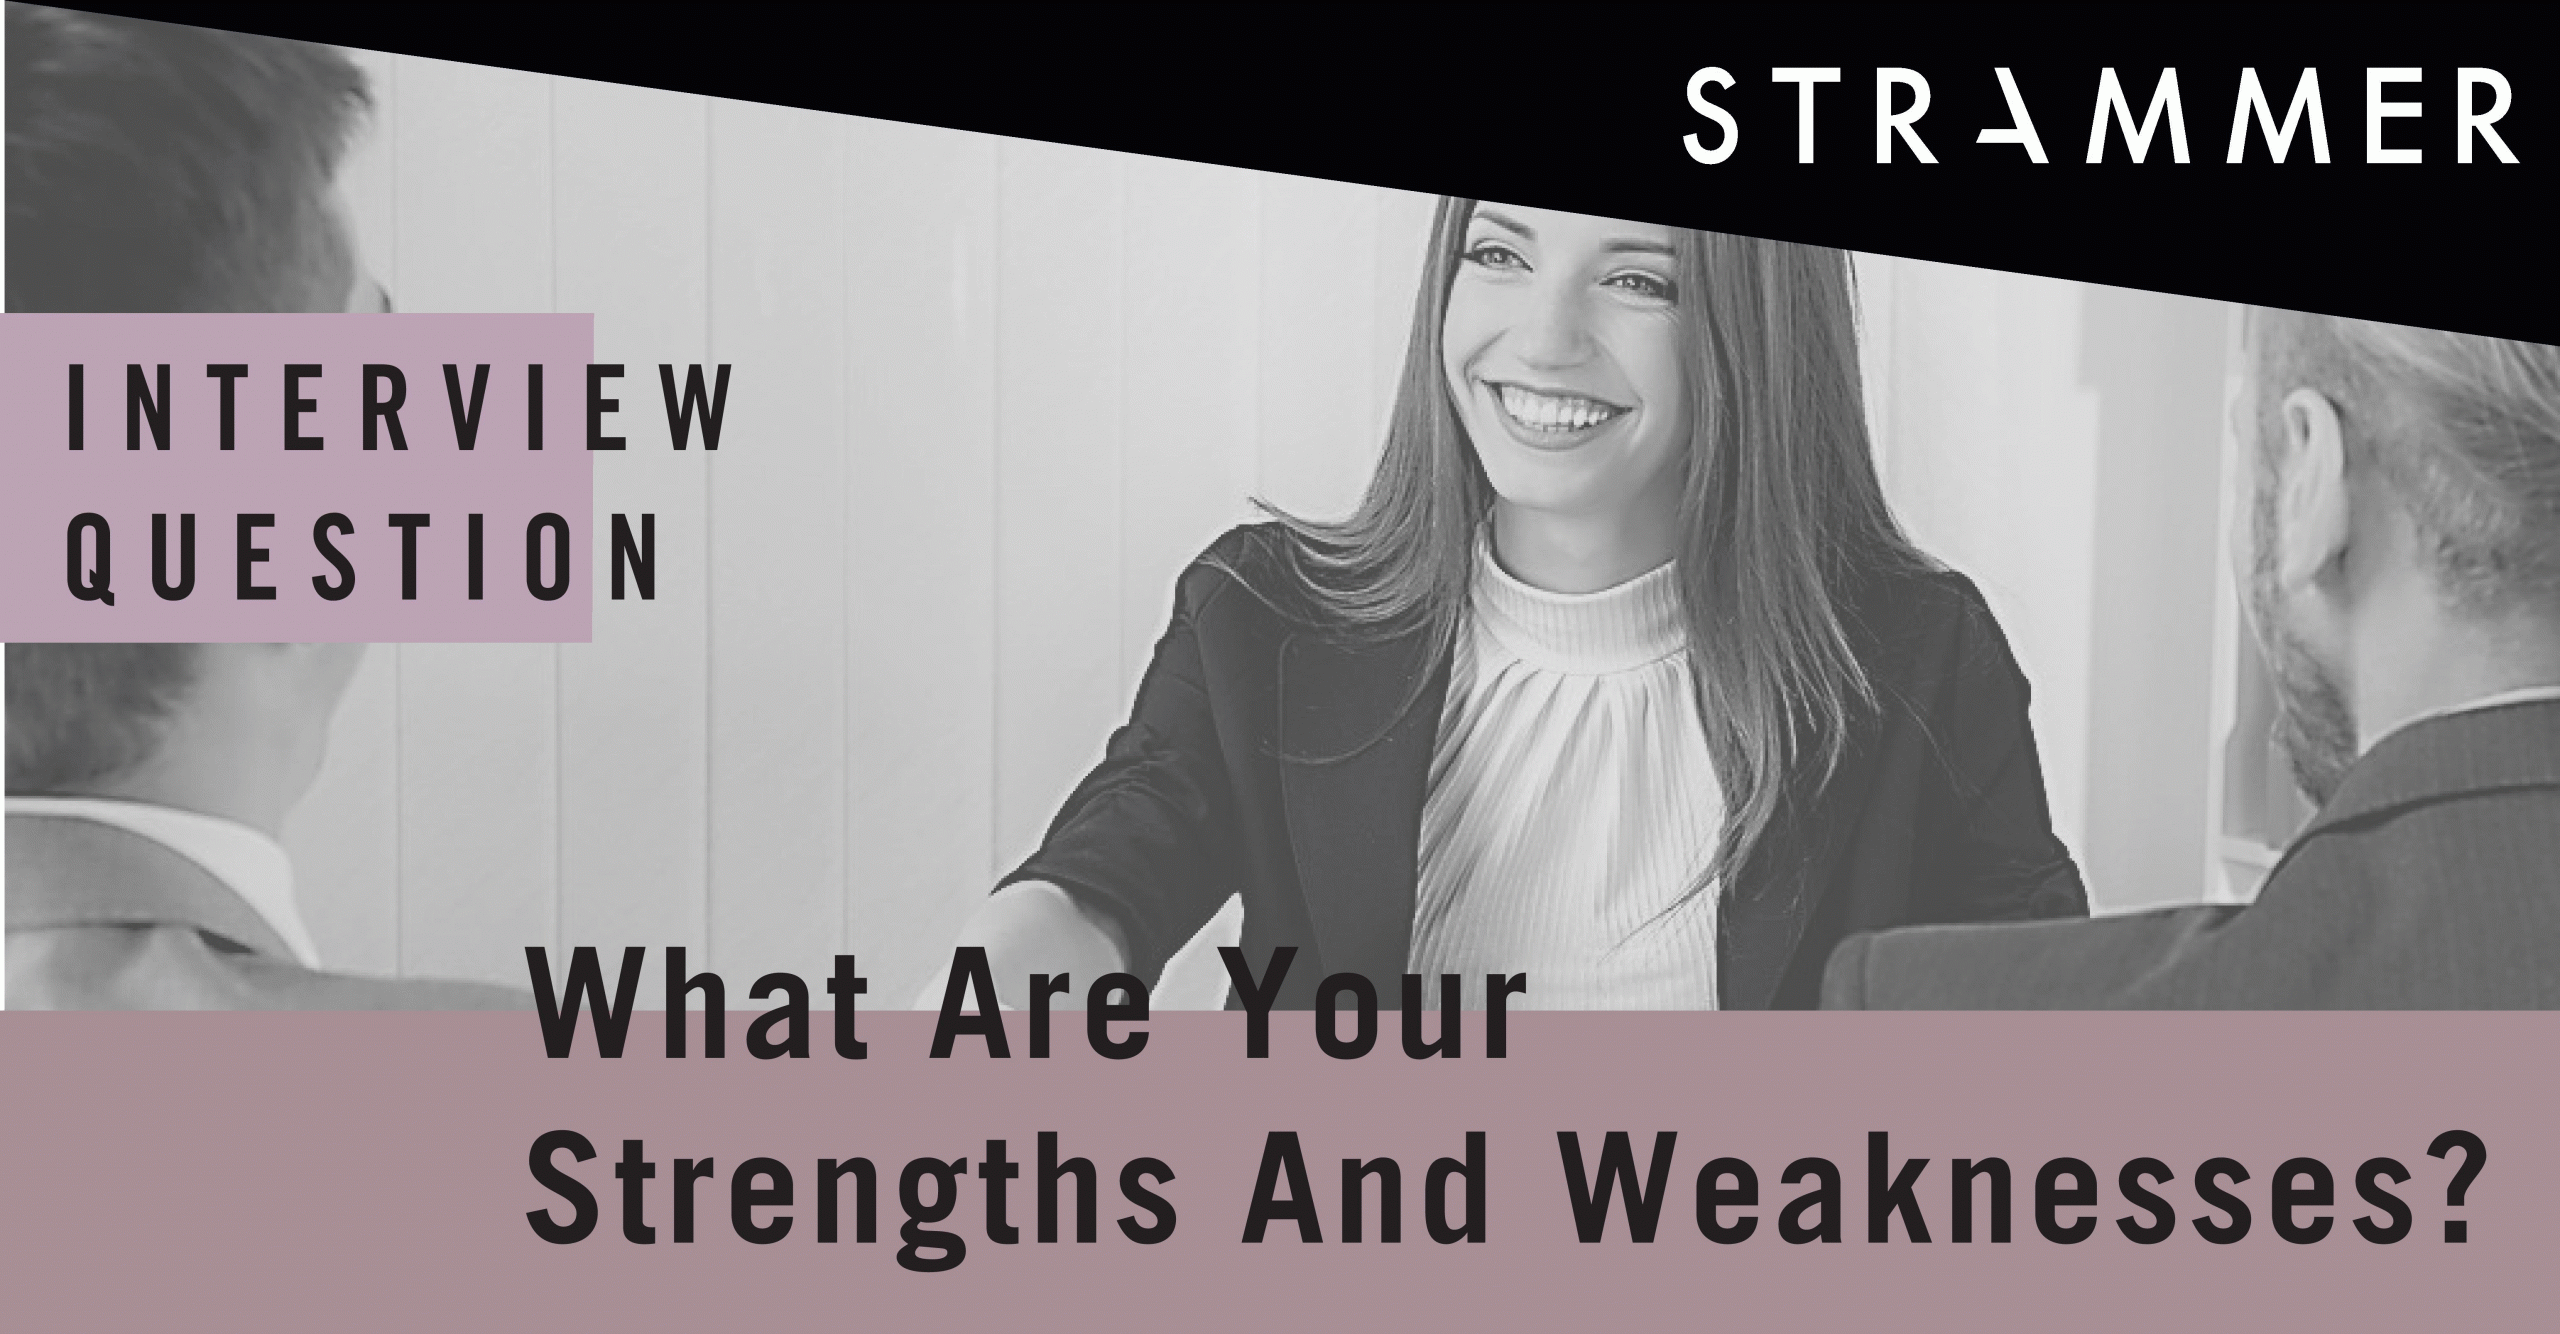 What Are Your Strengths And Weaknesses?